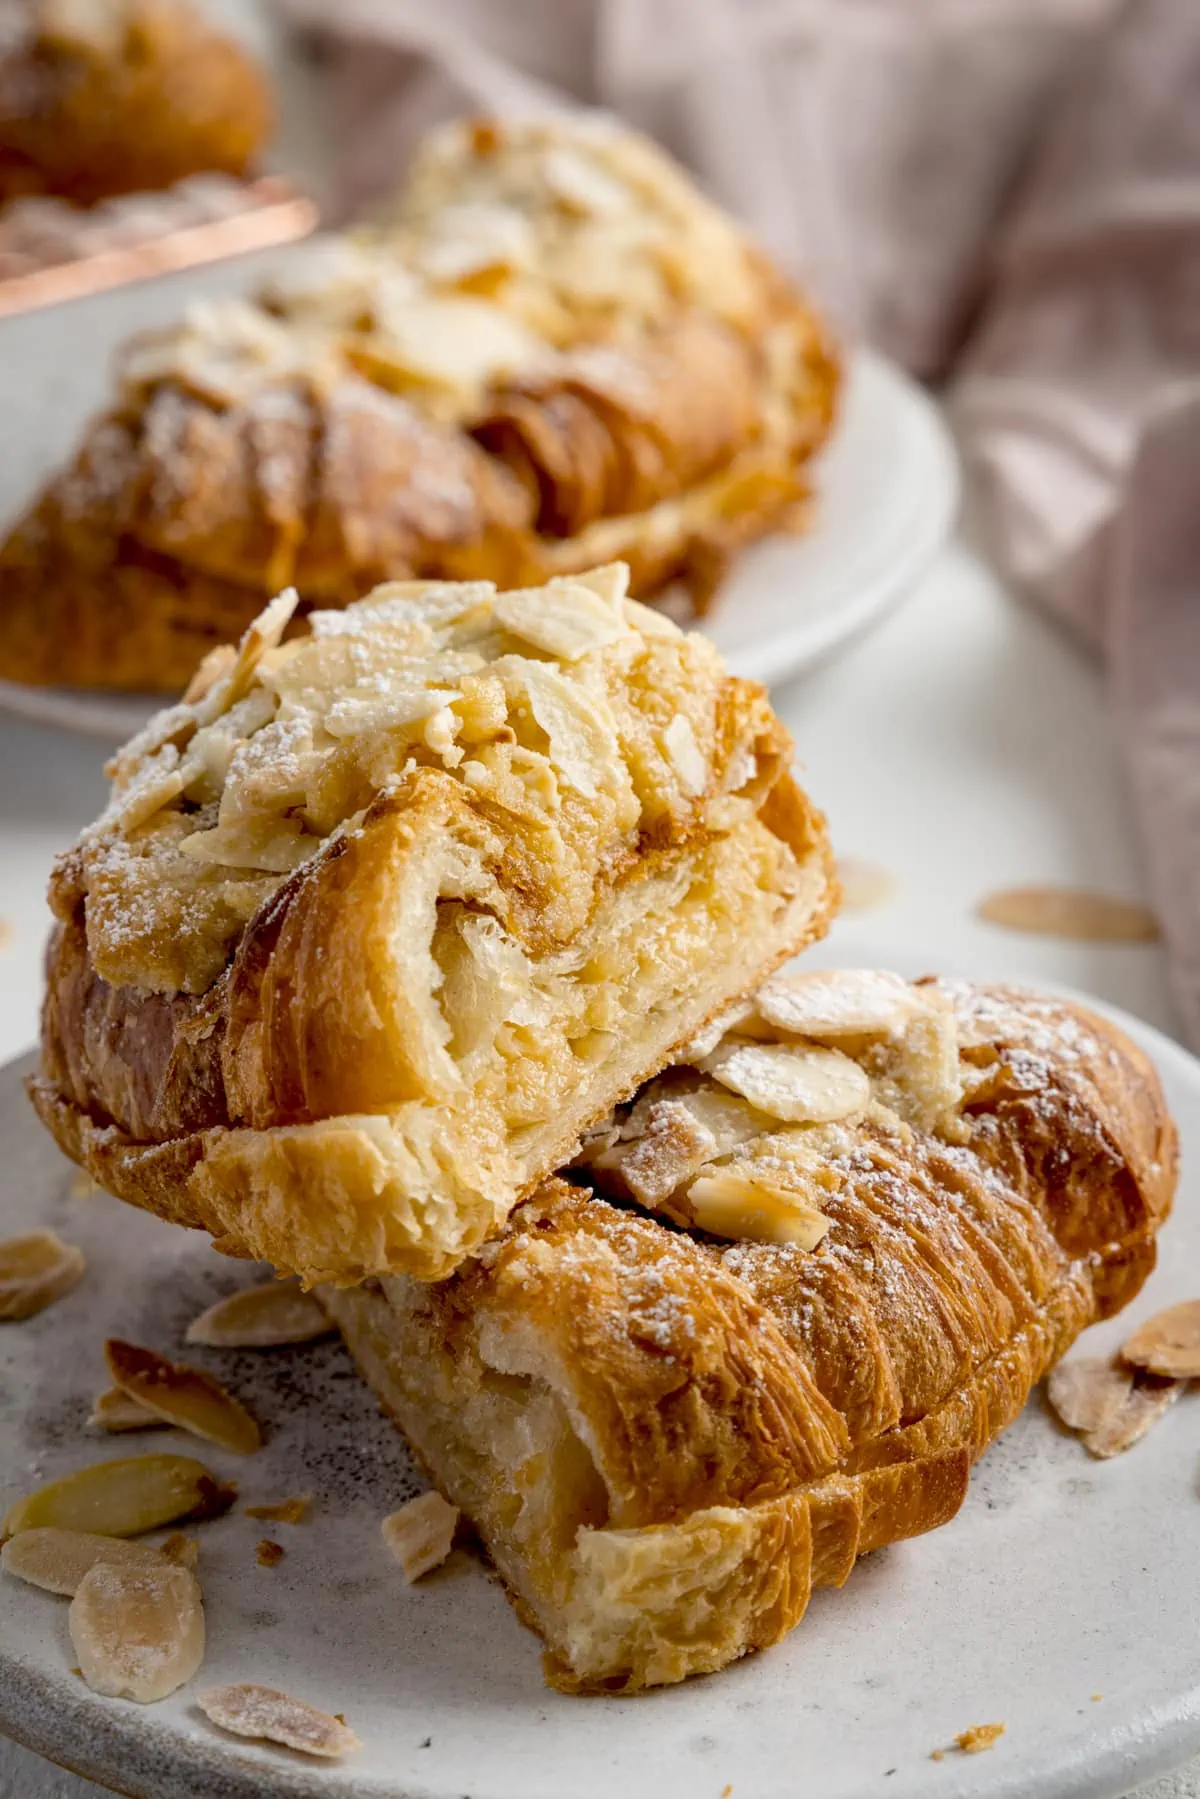 An almond croissant sliced in half and stacked on a white plate on a white background. There are further croissants and a pale pink napkin in the background.